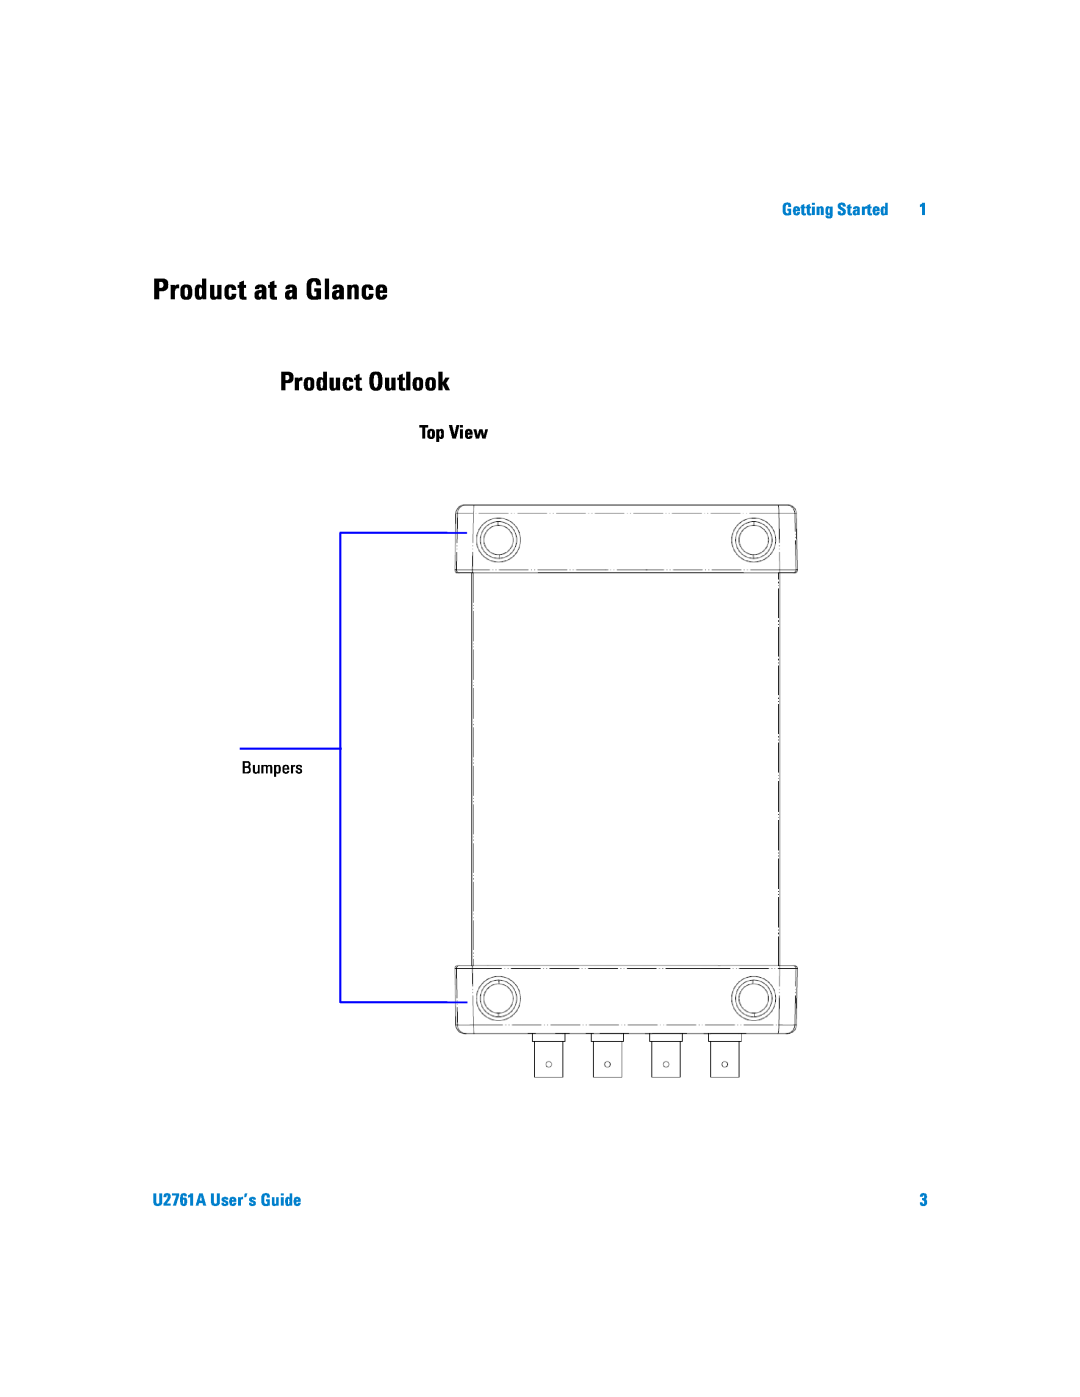 Agilent Technologies manual Product at a Glance, Product Outlook, Top View, U2761A User’s Guide, Getting Started 